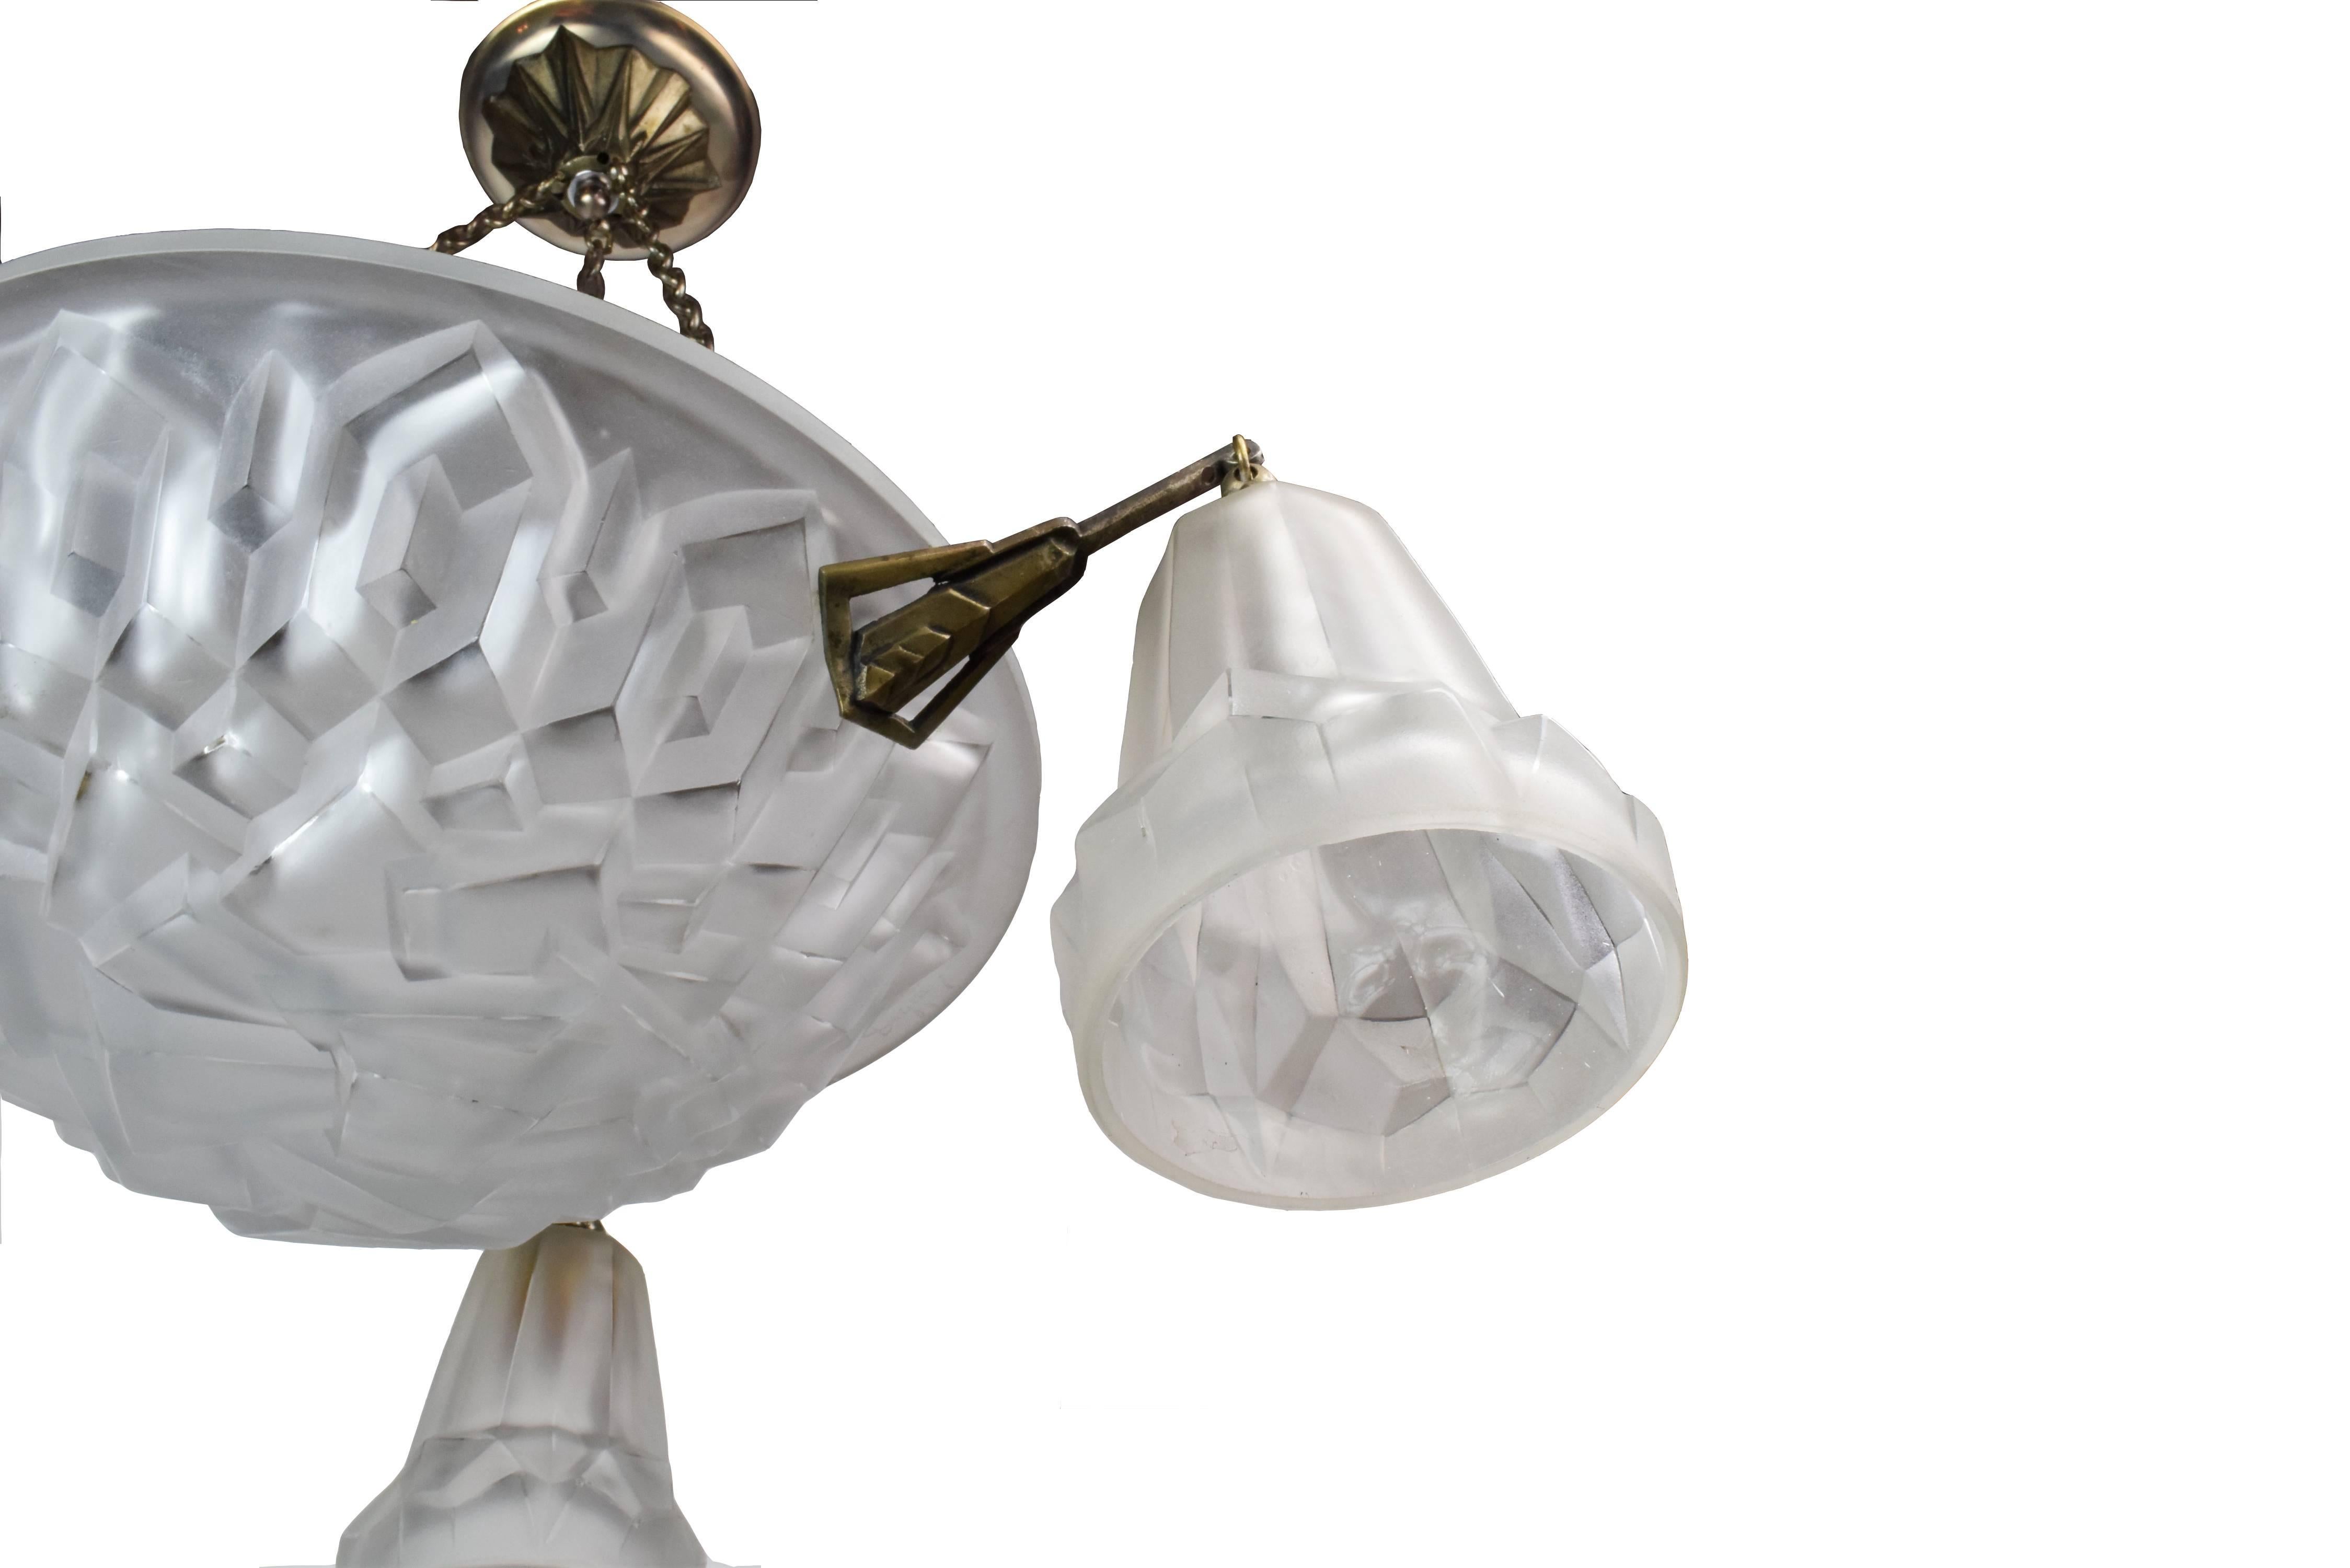 This French Art Deco chandelier with shades is made of beautiful frosted glass and has a carved geometric jagged shape, giving it a very unique, interesting, lovely look that would make it a wonderful addition to any space! It also has an engraved